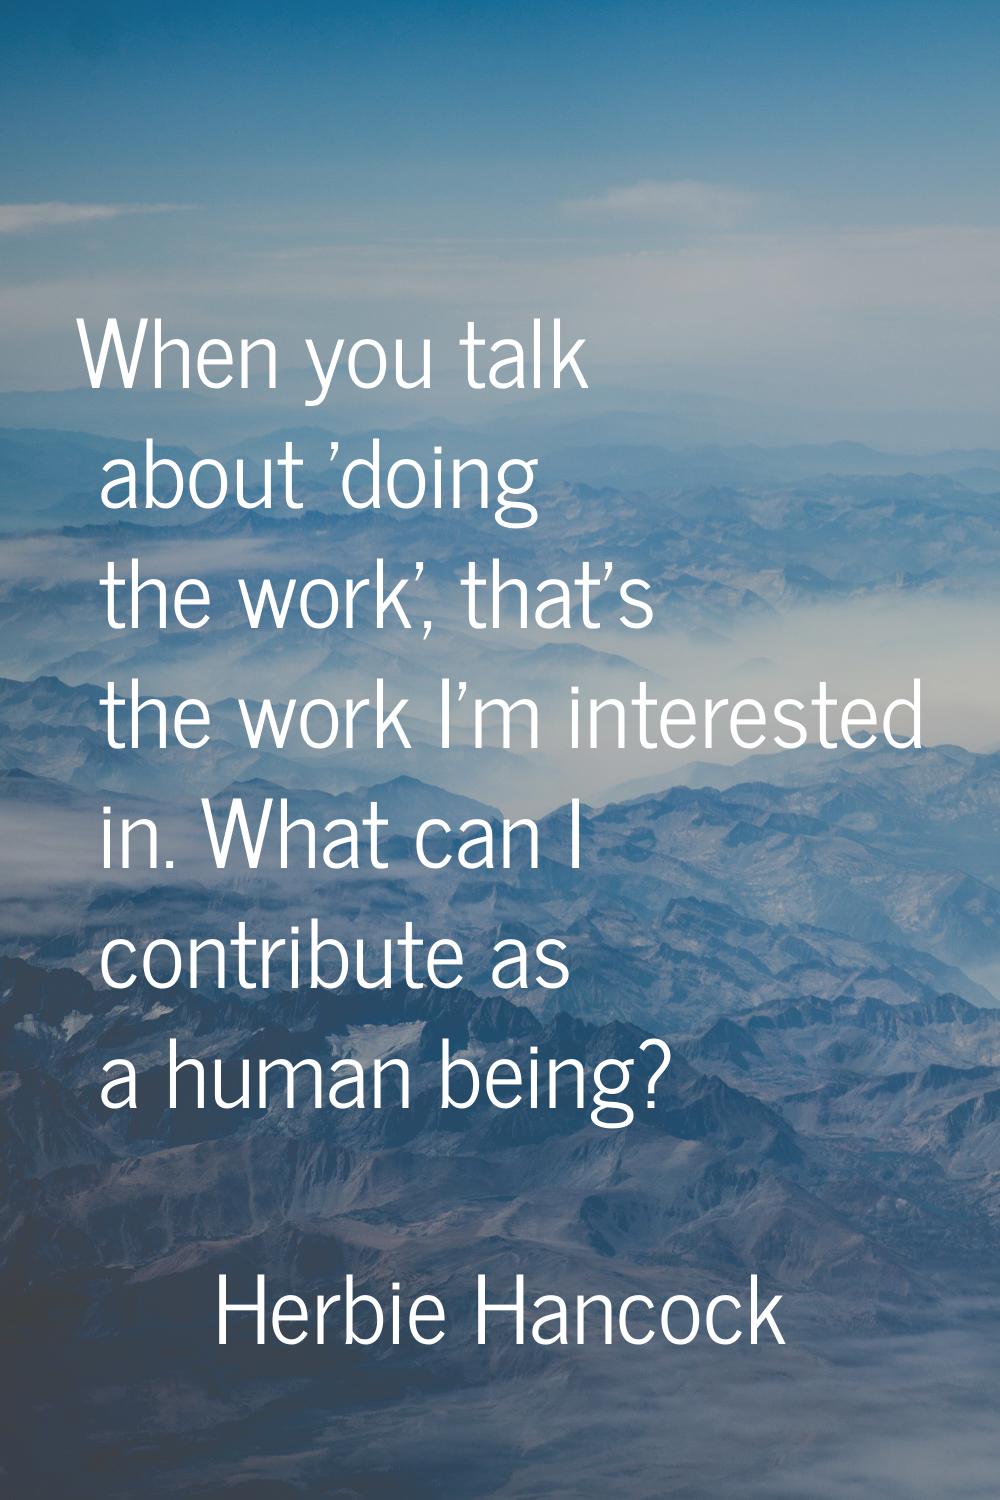 When you talk about 'doing the work', that's the work I'm interested in. What can I contribute as a